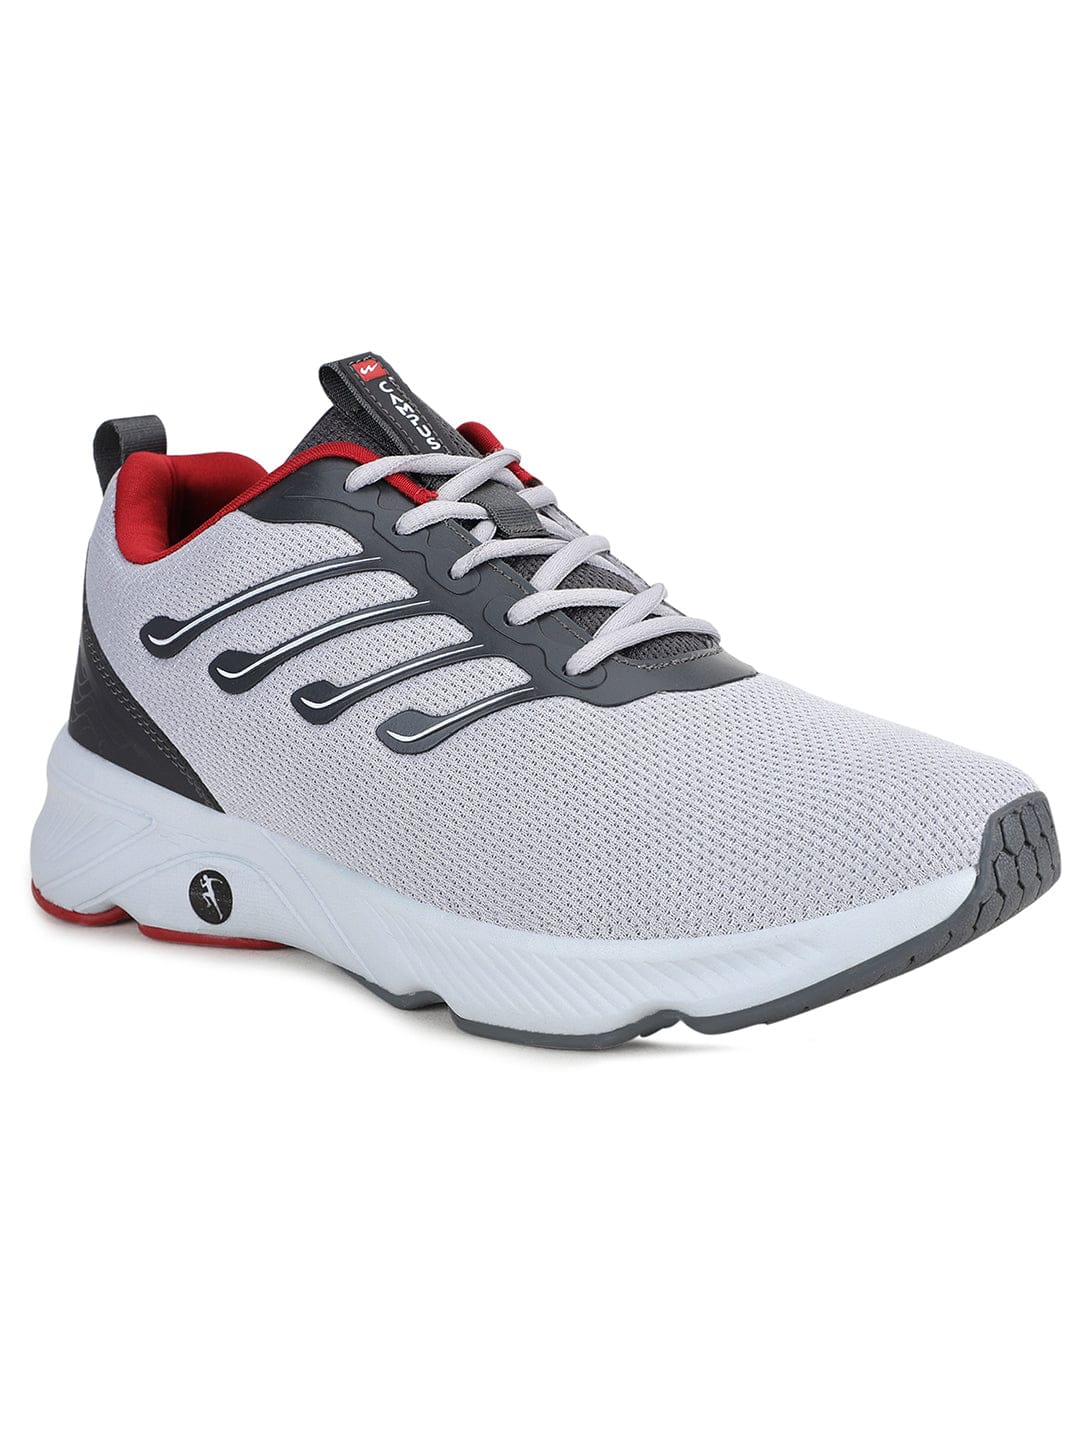 Buy Running Shoes For Men: Rumble-Gry-D-Gry | Campus Shoes